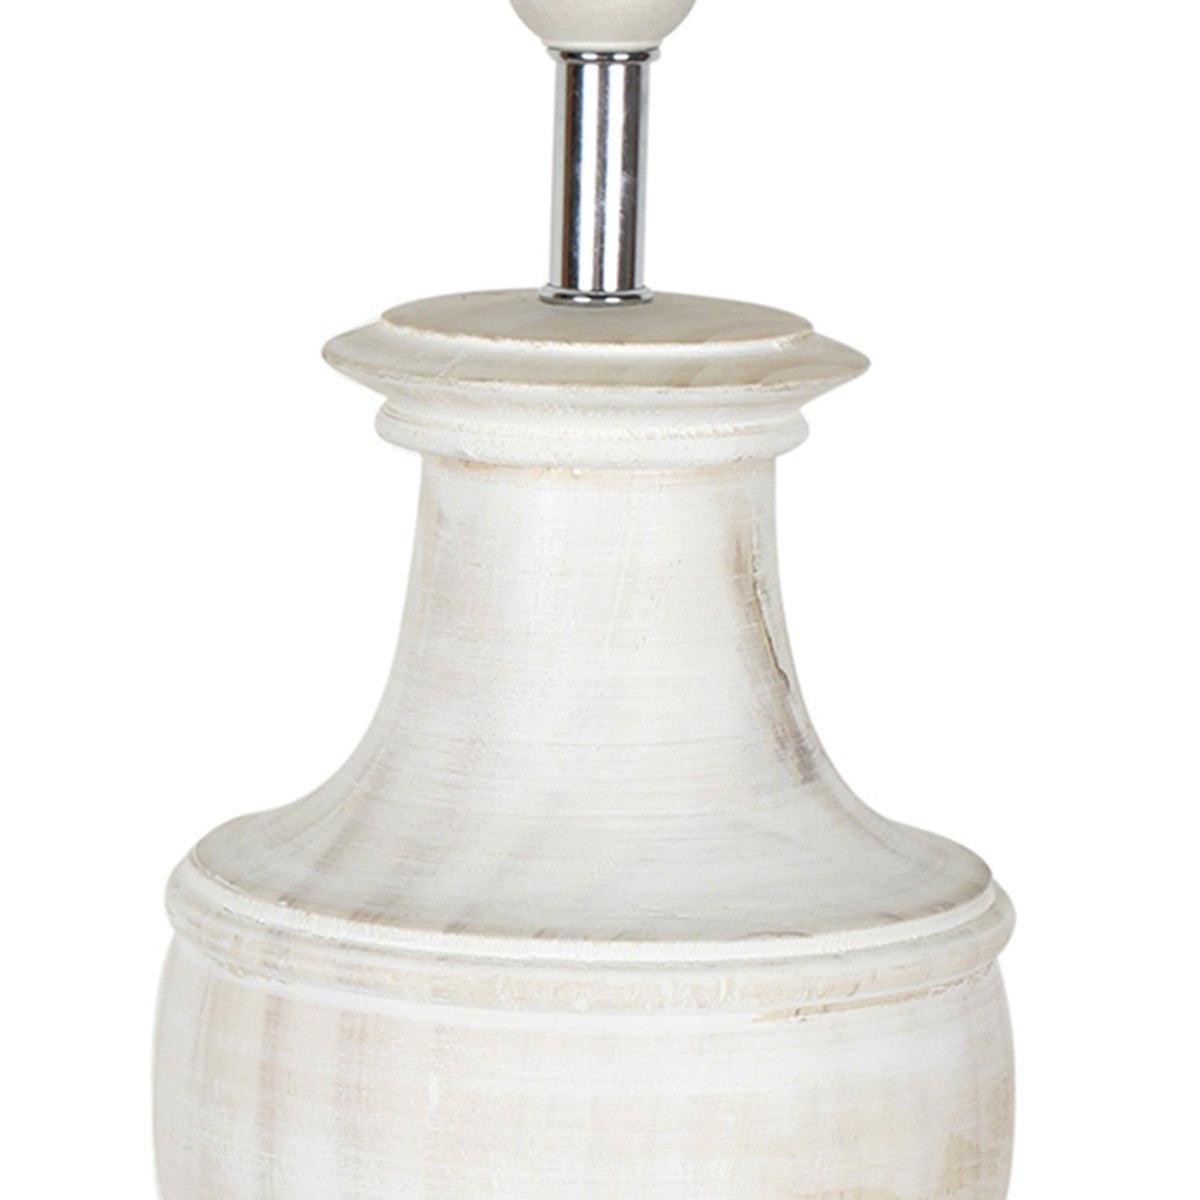 Detec Off White Eclectic Table Lamp